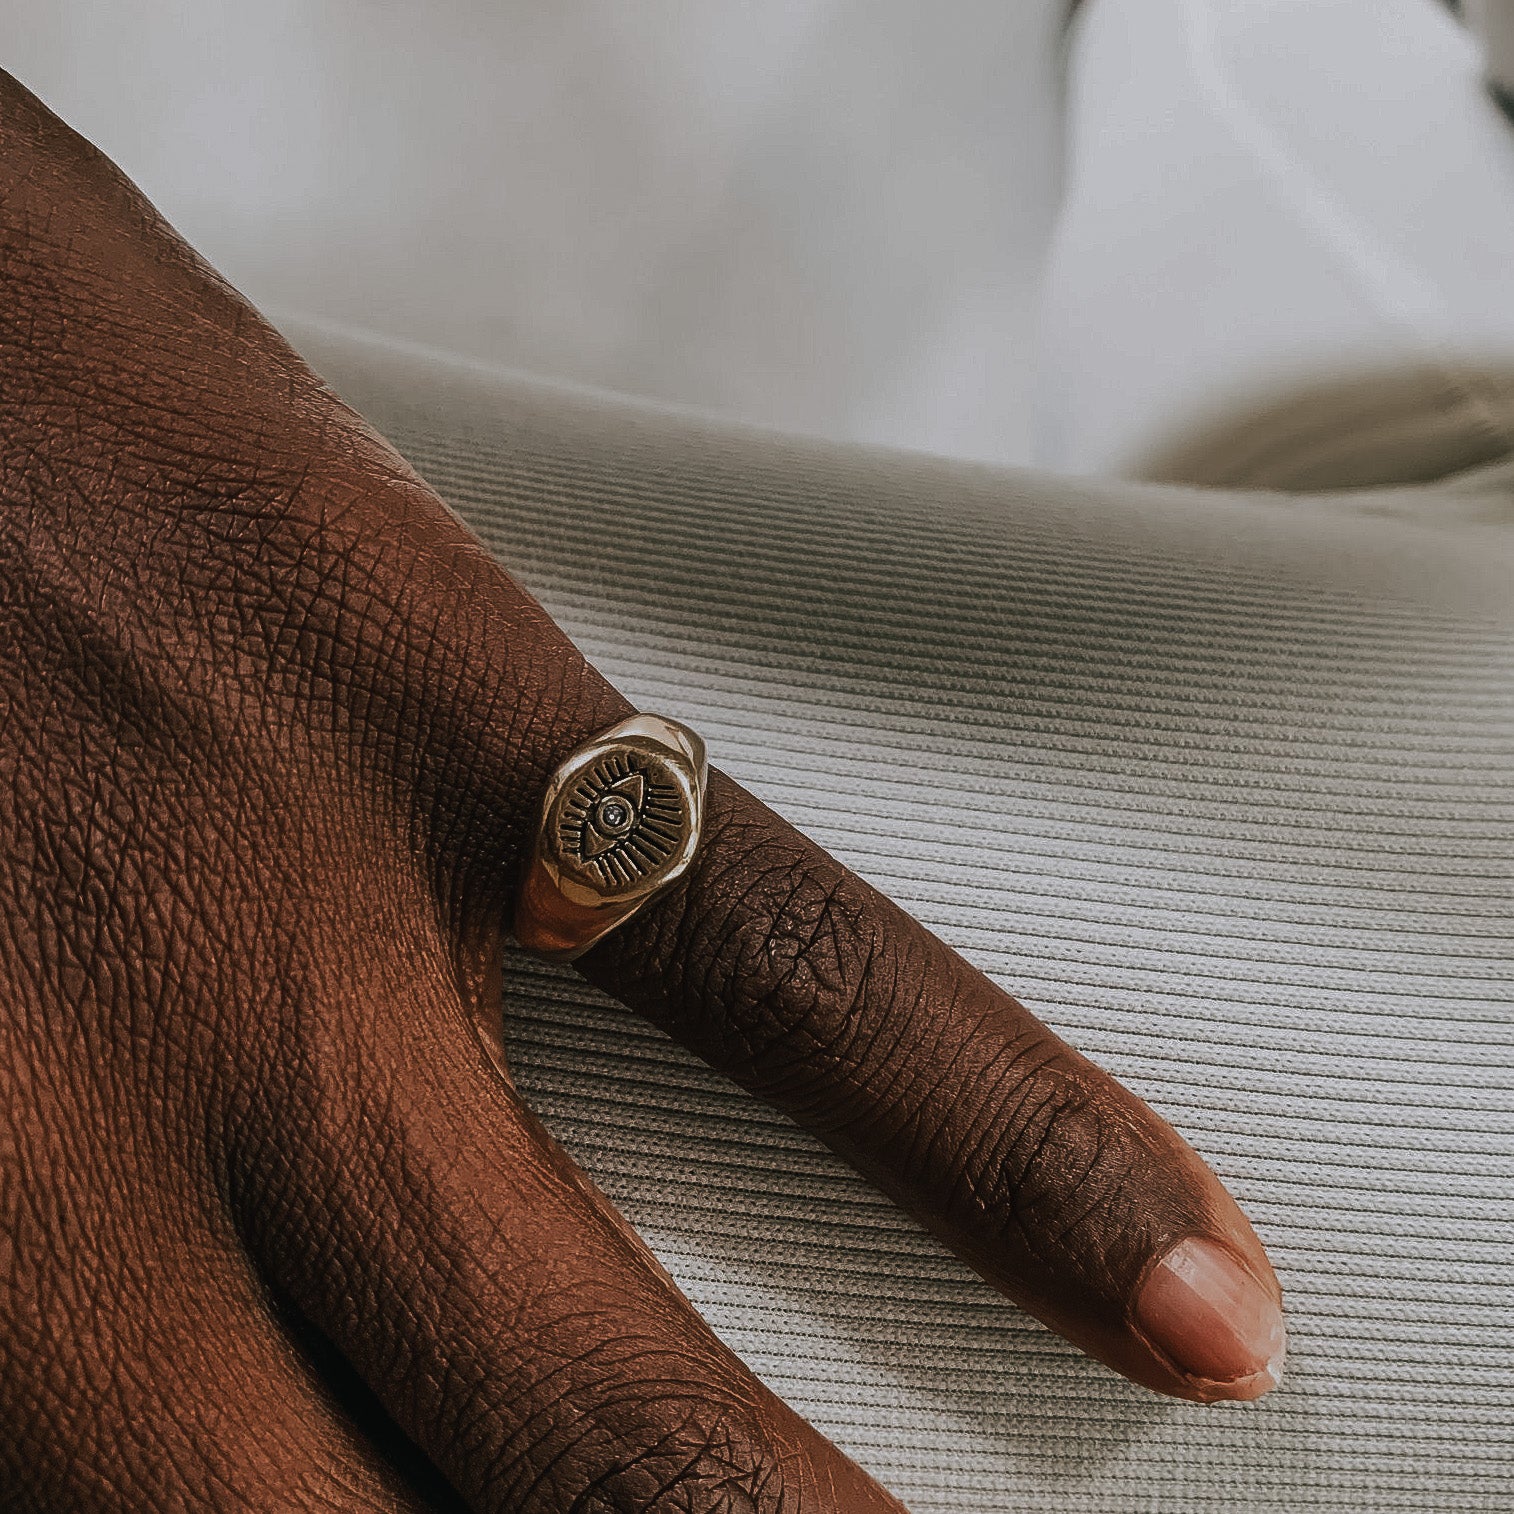 CLAIRVOYANCE SIGNET RING